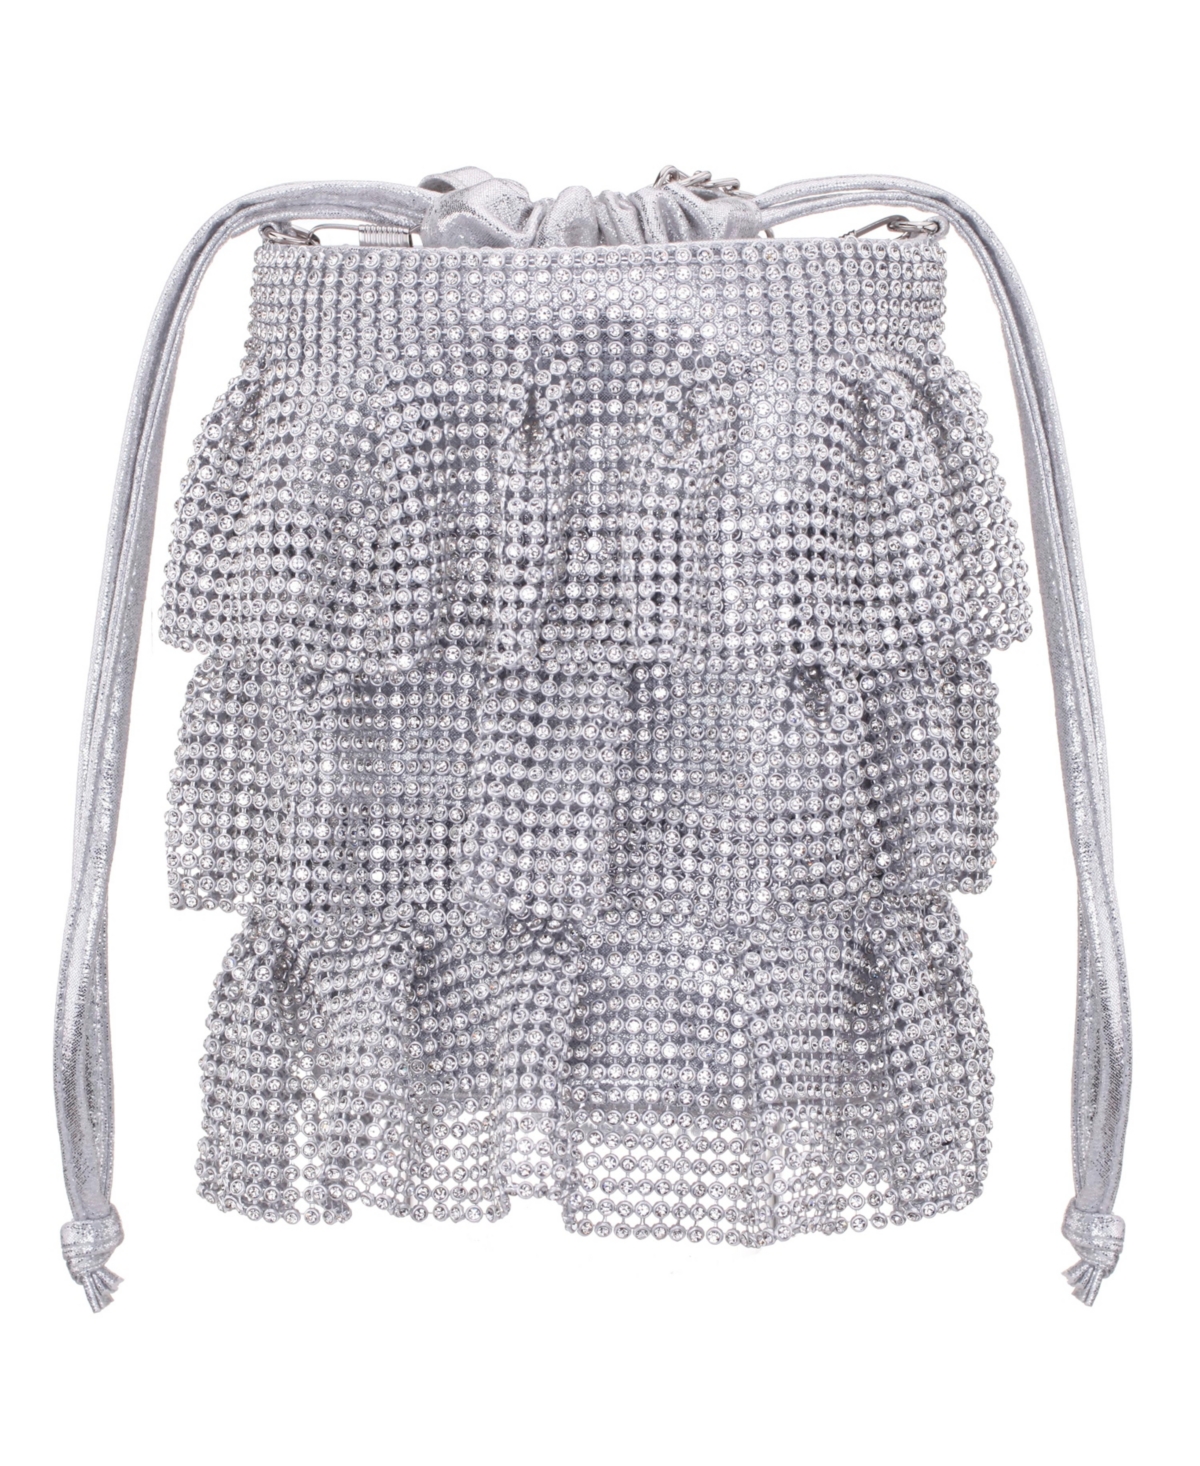 Nina 4 Tired Crystal Mesh Pouch Bag In Silver